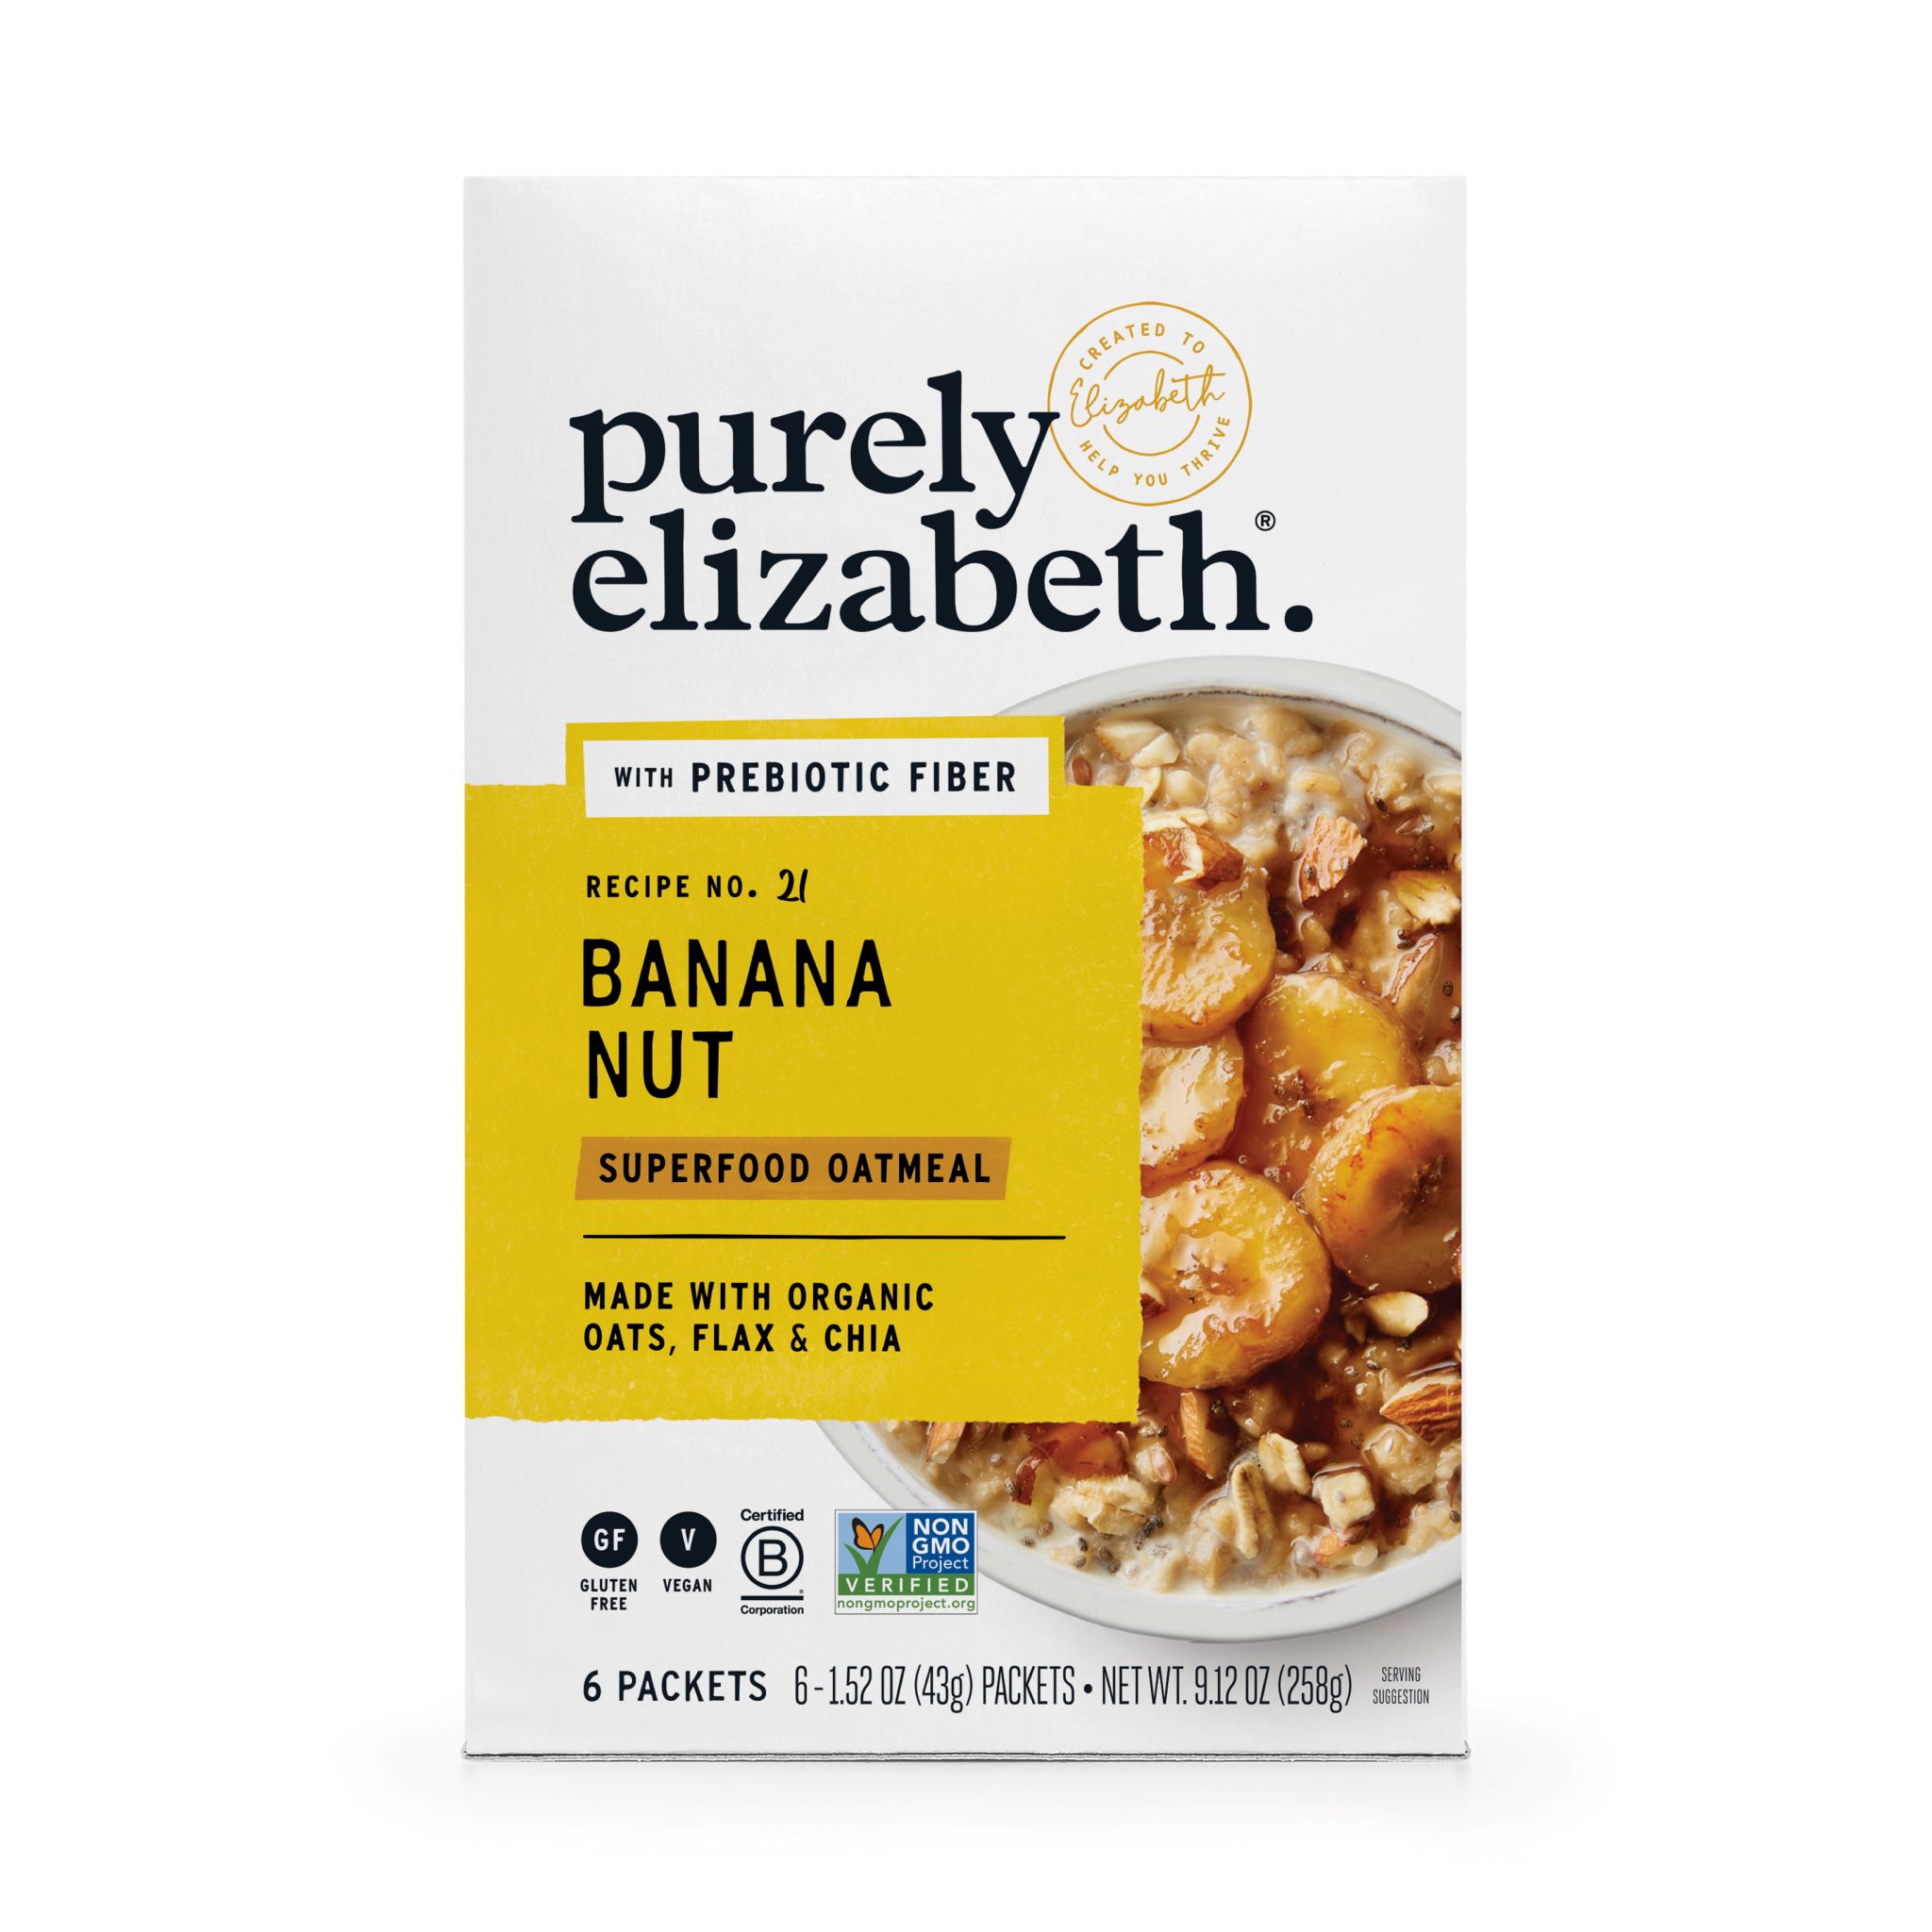 Purely Elizabeth Organic Oats, Flax, & Chia Banana Nut Instant Oatmeal, 1.52 oz, 6 Count - image 1 of 8